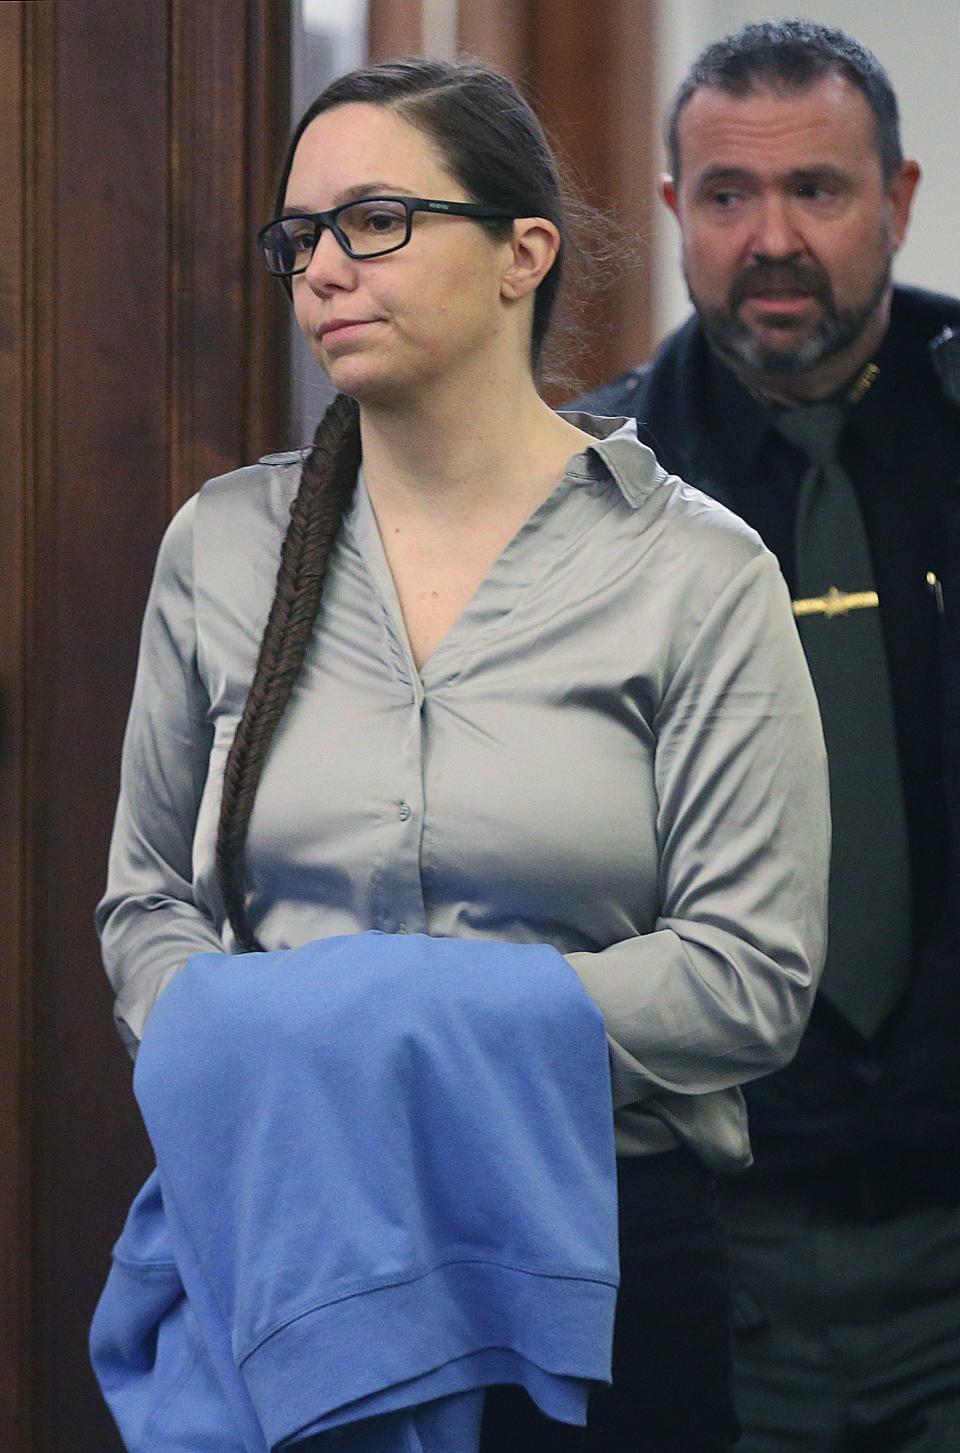 Erica Stefanko is escorted into Judge Jennifer Towell's courtroom on Monday for the start of her retrial in Summit County Common Pleas Court. Stefanko is accused of making the bogus pizza delivery call that lured Ashley Biggs to where she was killed in 2012.